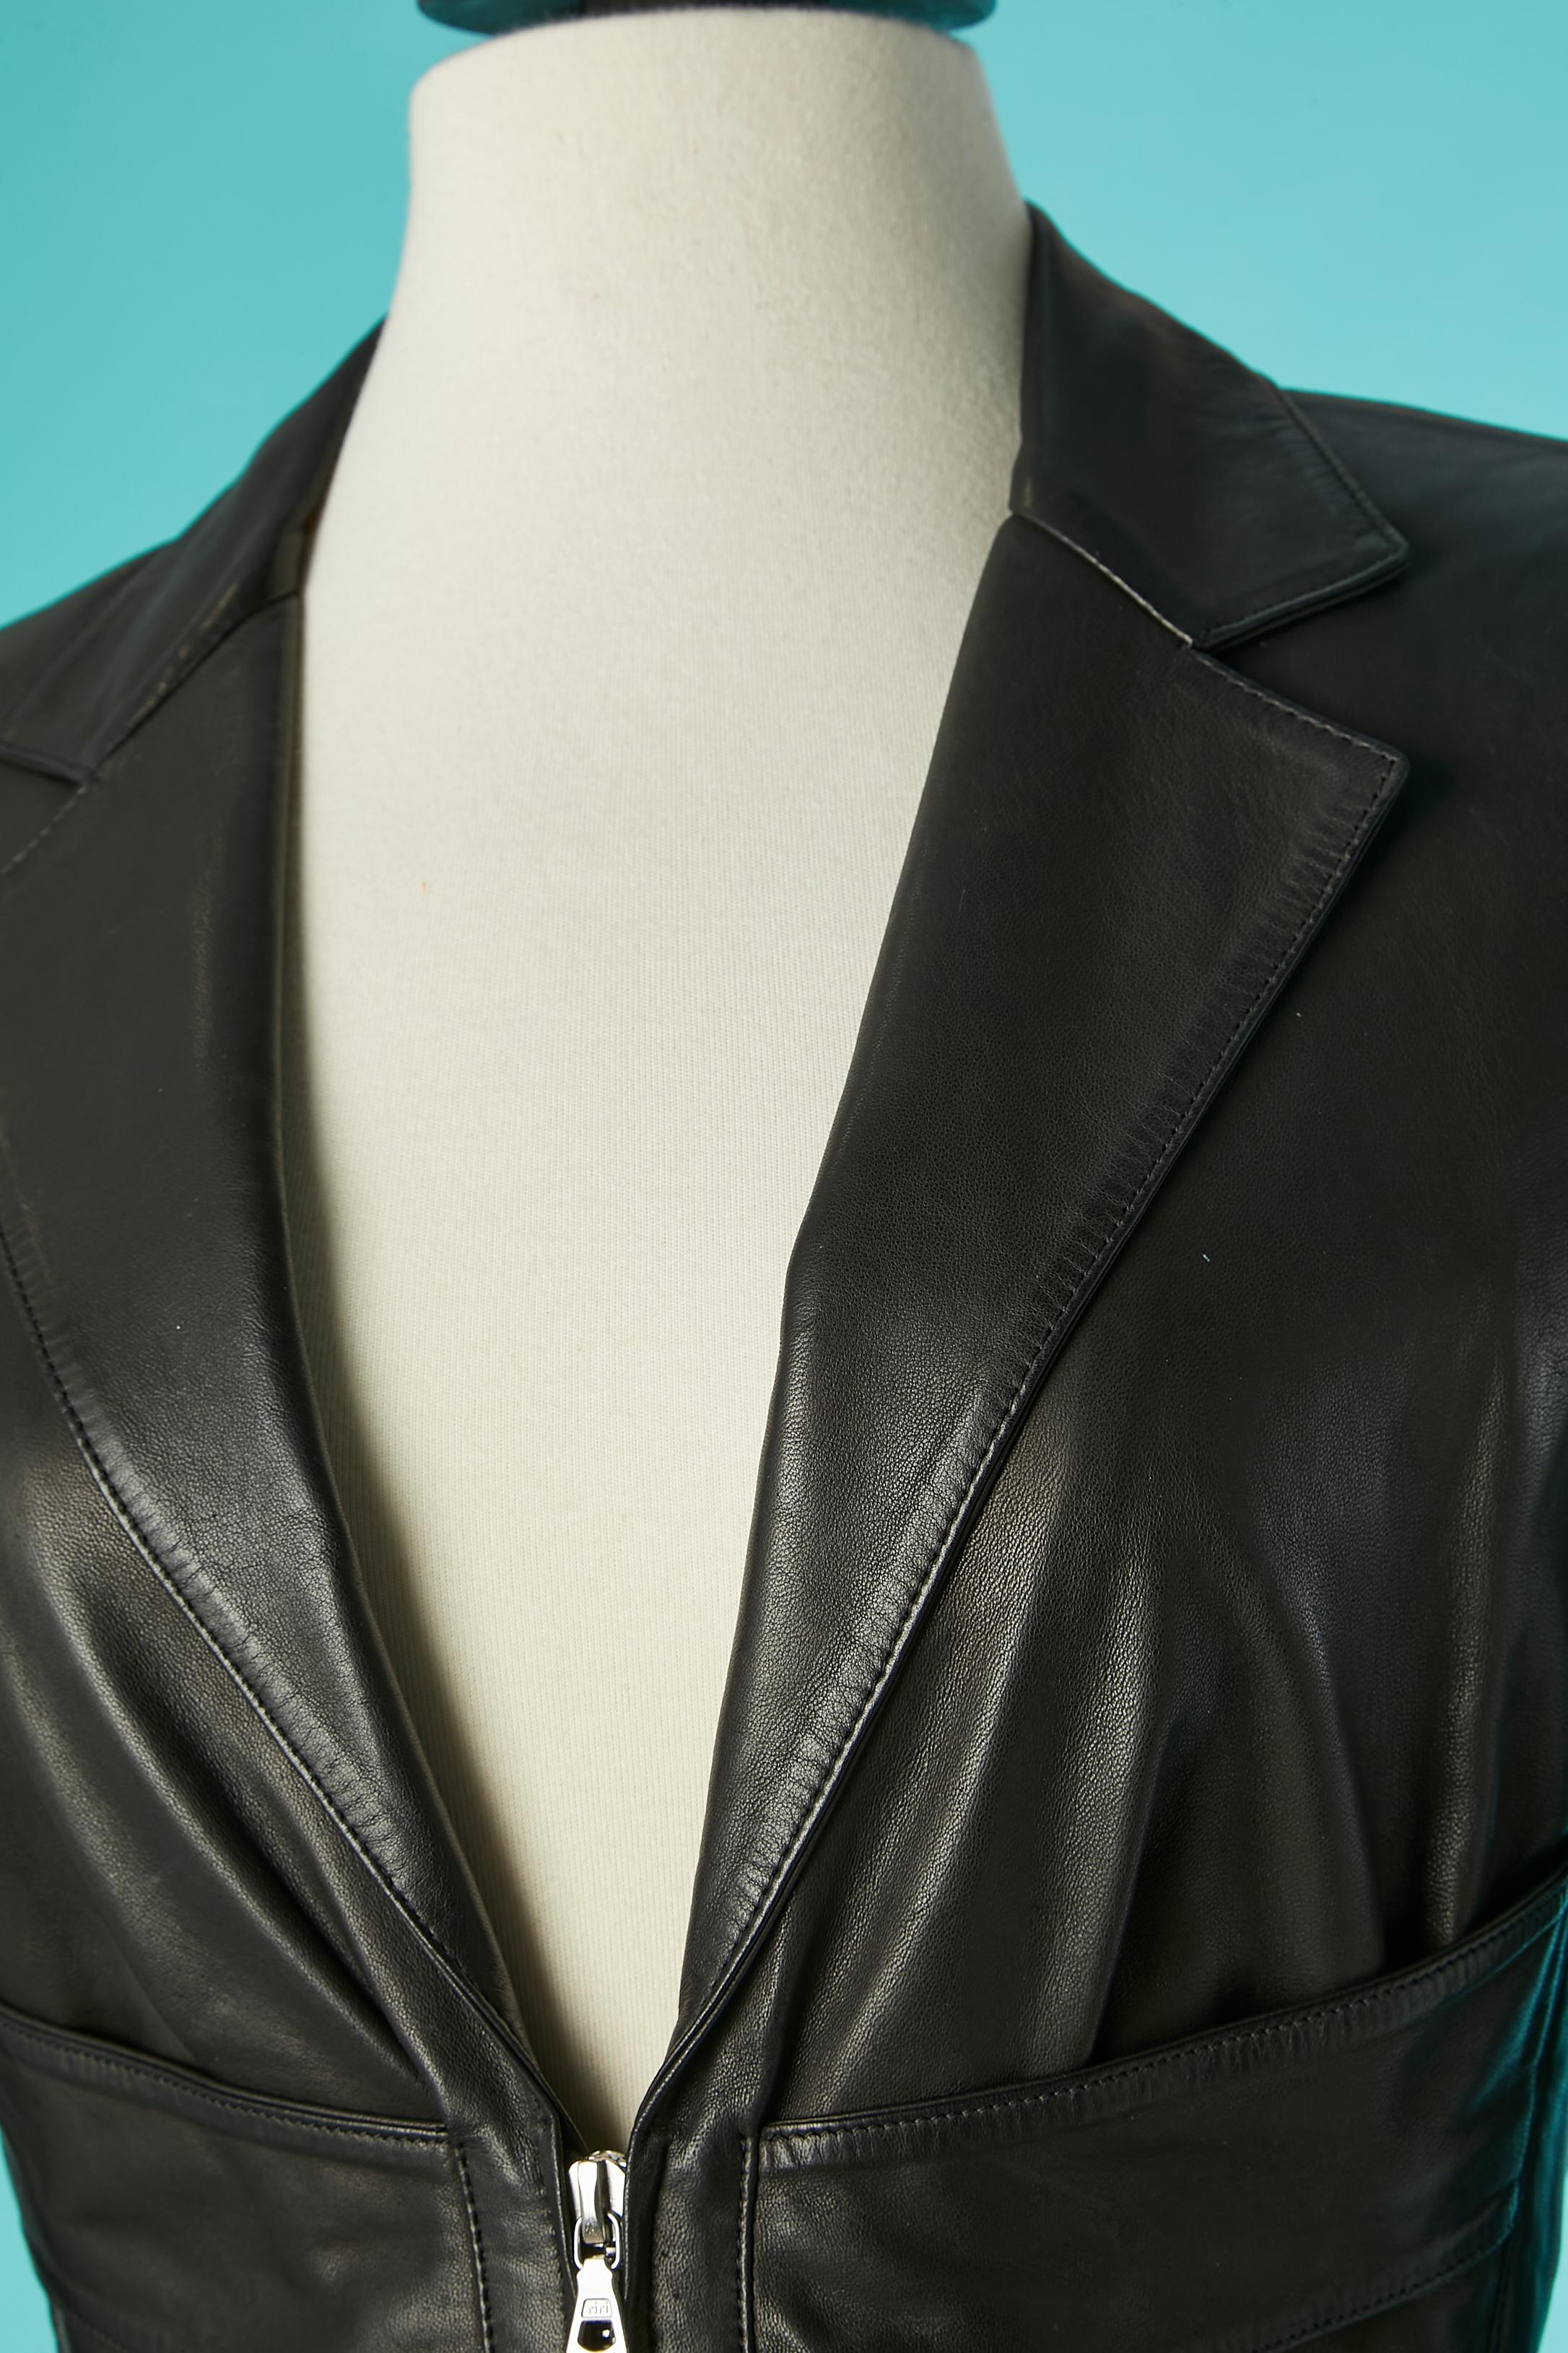 Black leather jacket with cut-work and laces in the back. Shell : sheep leather. Lining composition: 70% acetate, 30% rayon. 
Shoulder pad. Buttons and buttonholes on the cuffs. 
SIZE M 